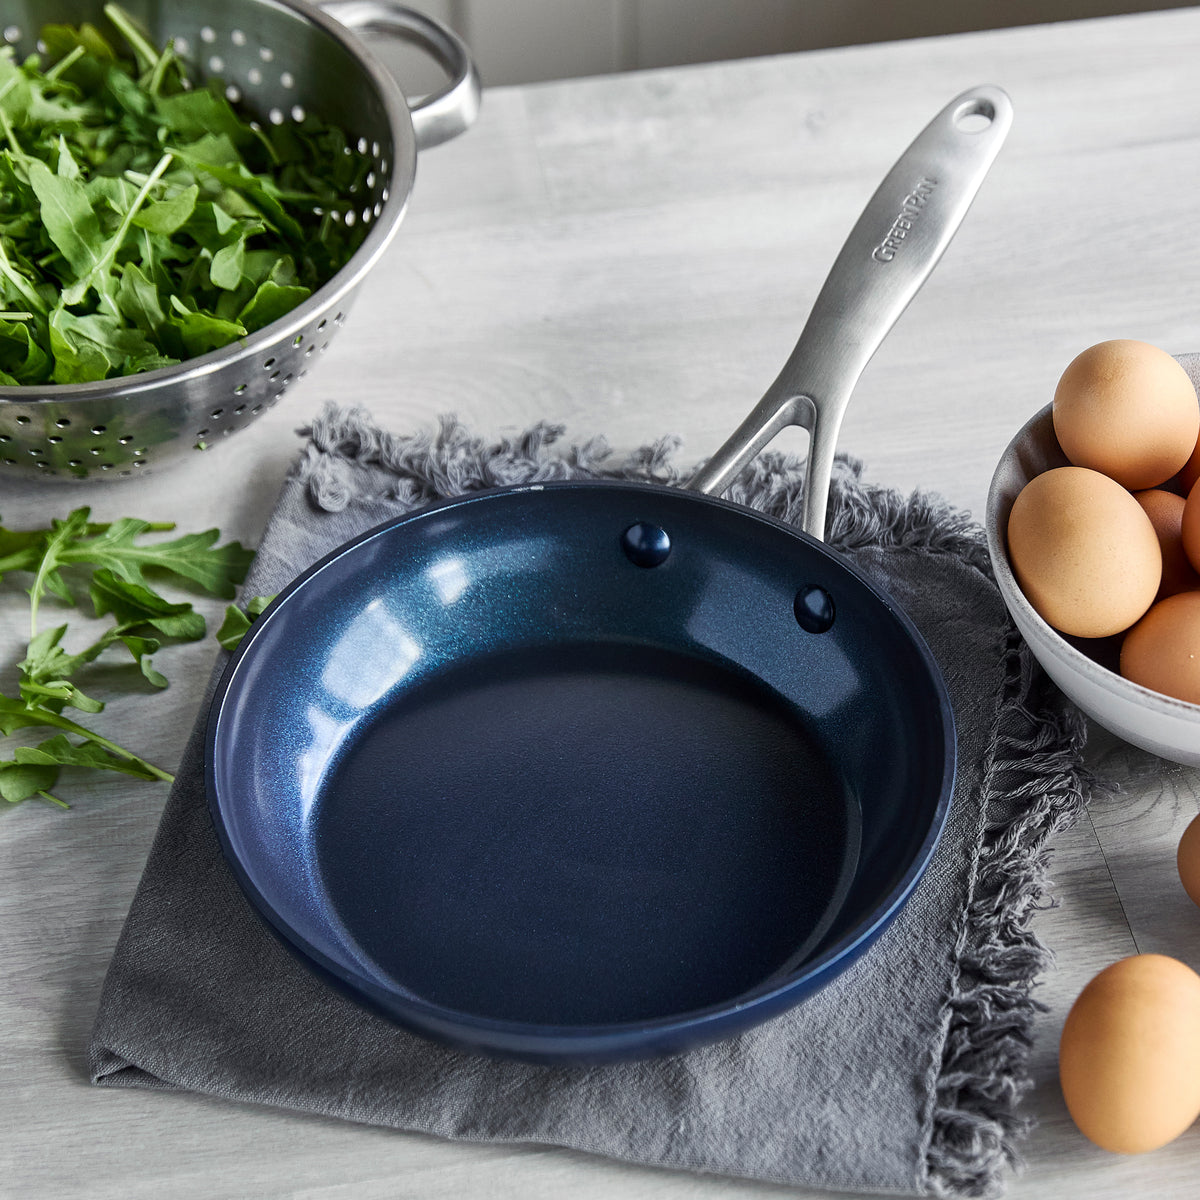 Blue Diamond Ceramic Nonstick 10 inch Covered Frying Pan, Green